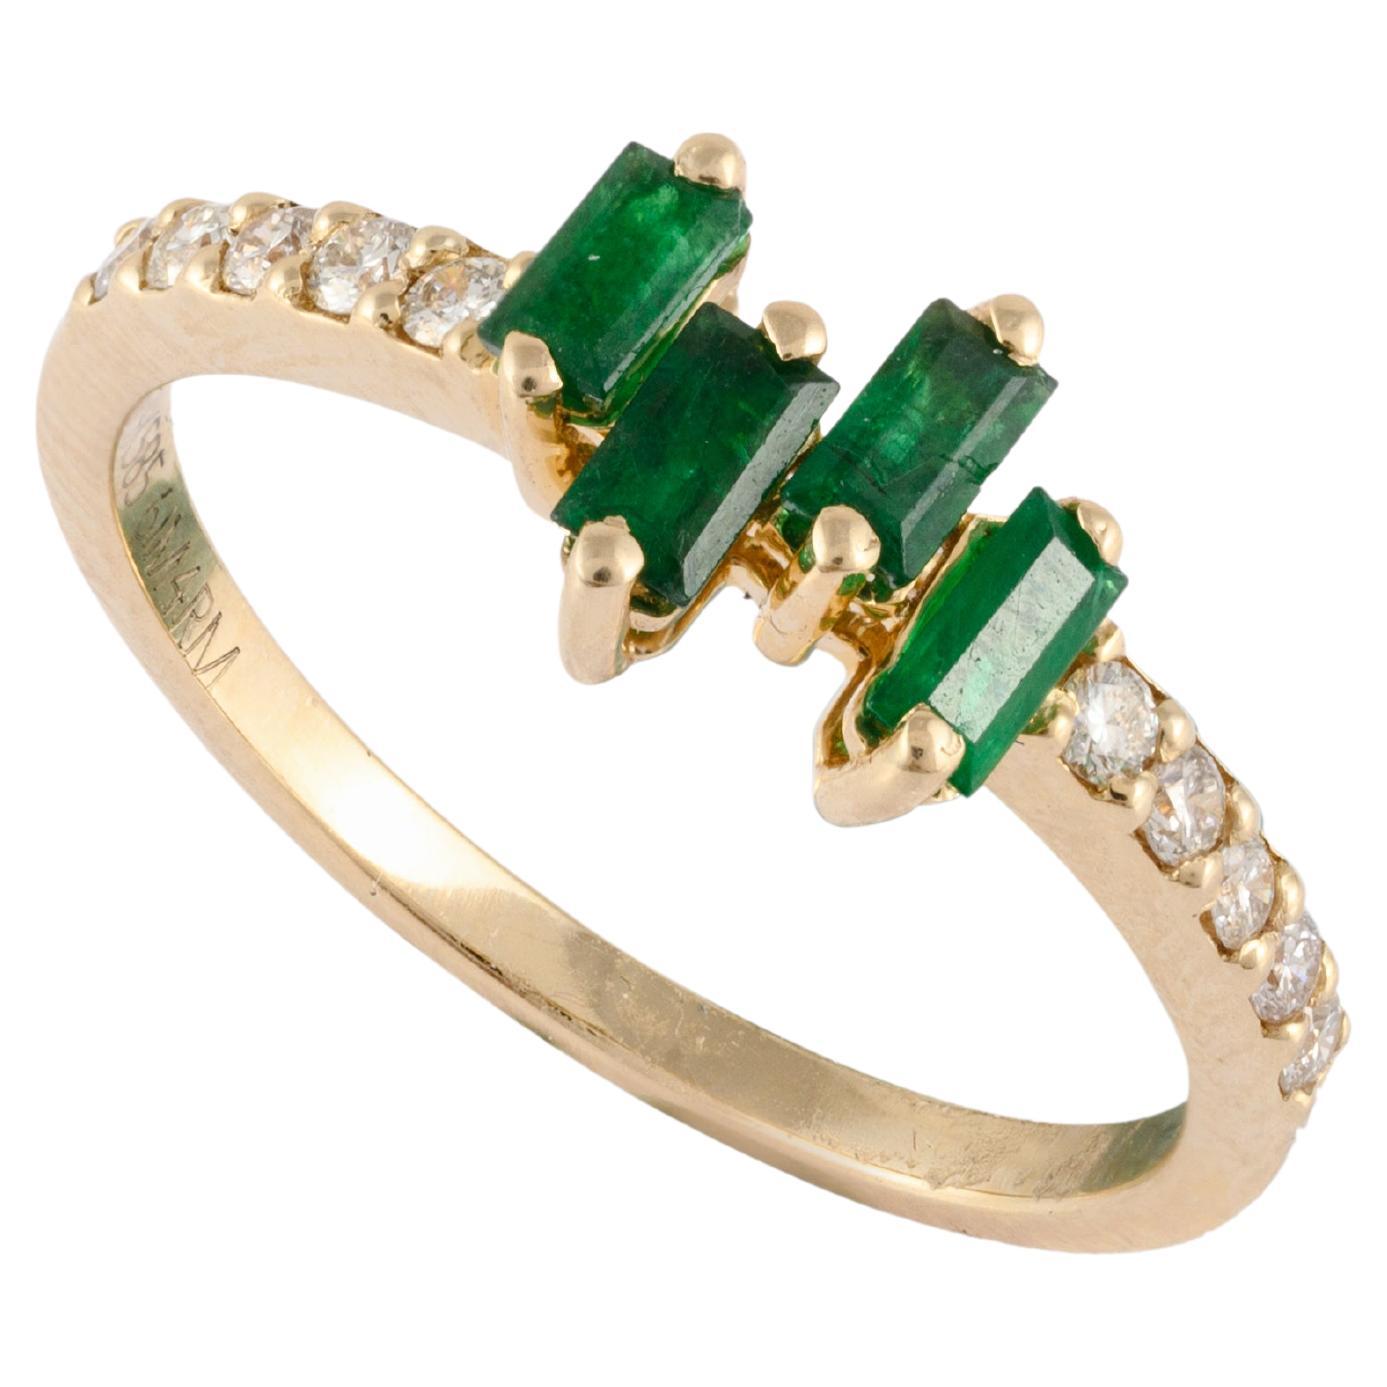 For Sale:  Solid 14 Karat Yellow Gold Emerald and Diamond Minimalist Ring Gift